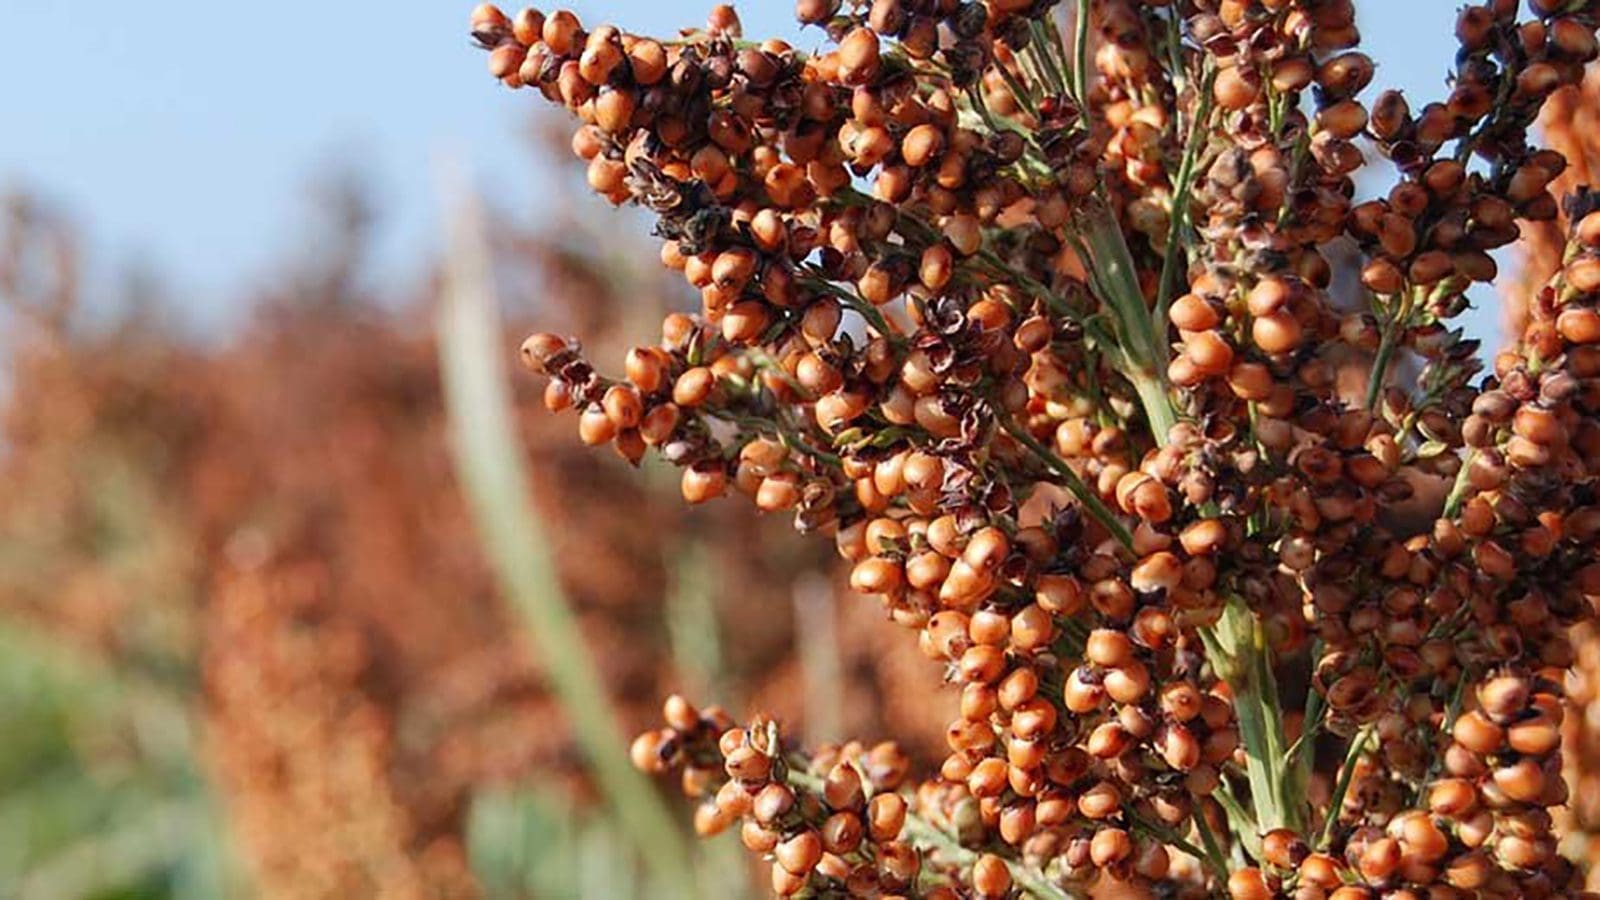 Nestle innovatively upcycles sorghum side stream in West Africa into nutritious porridge